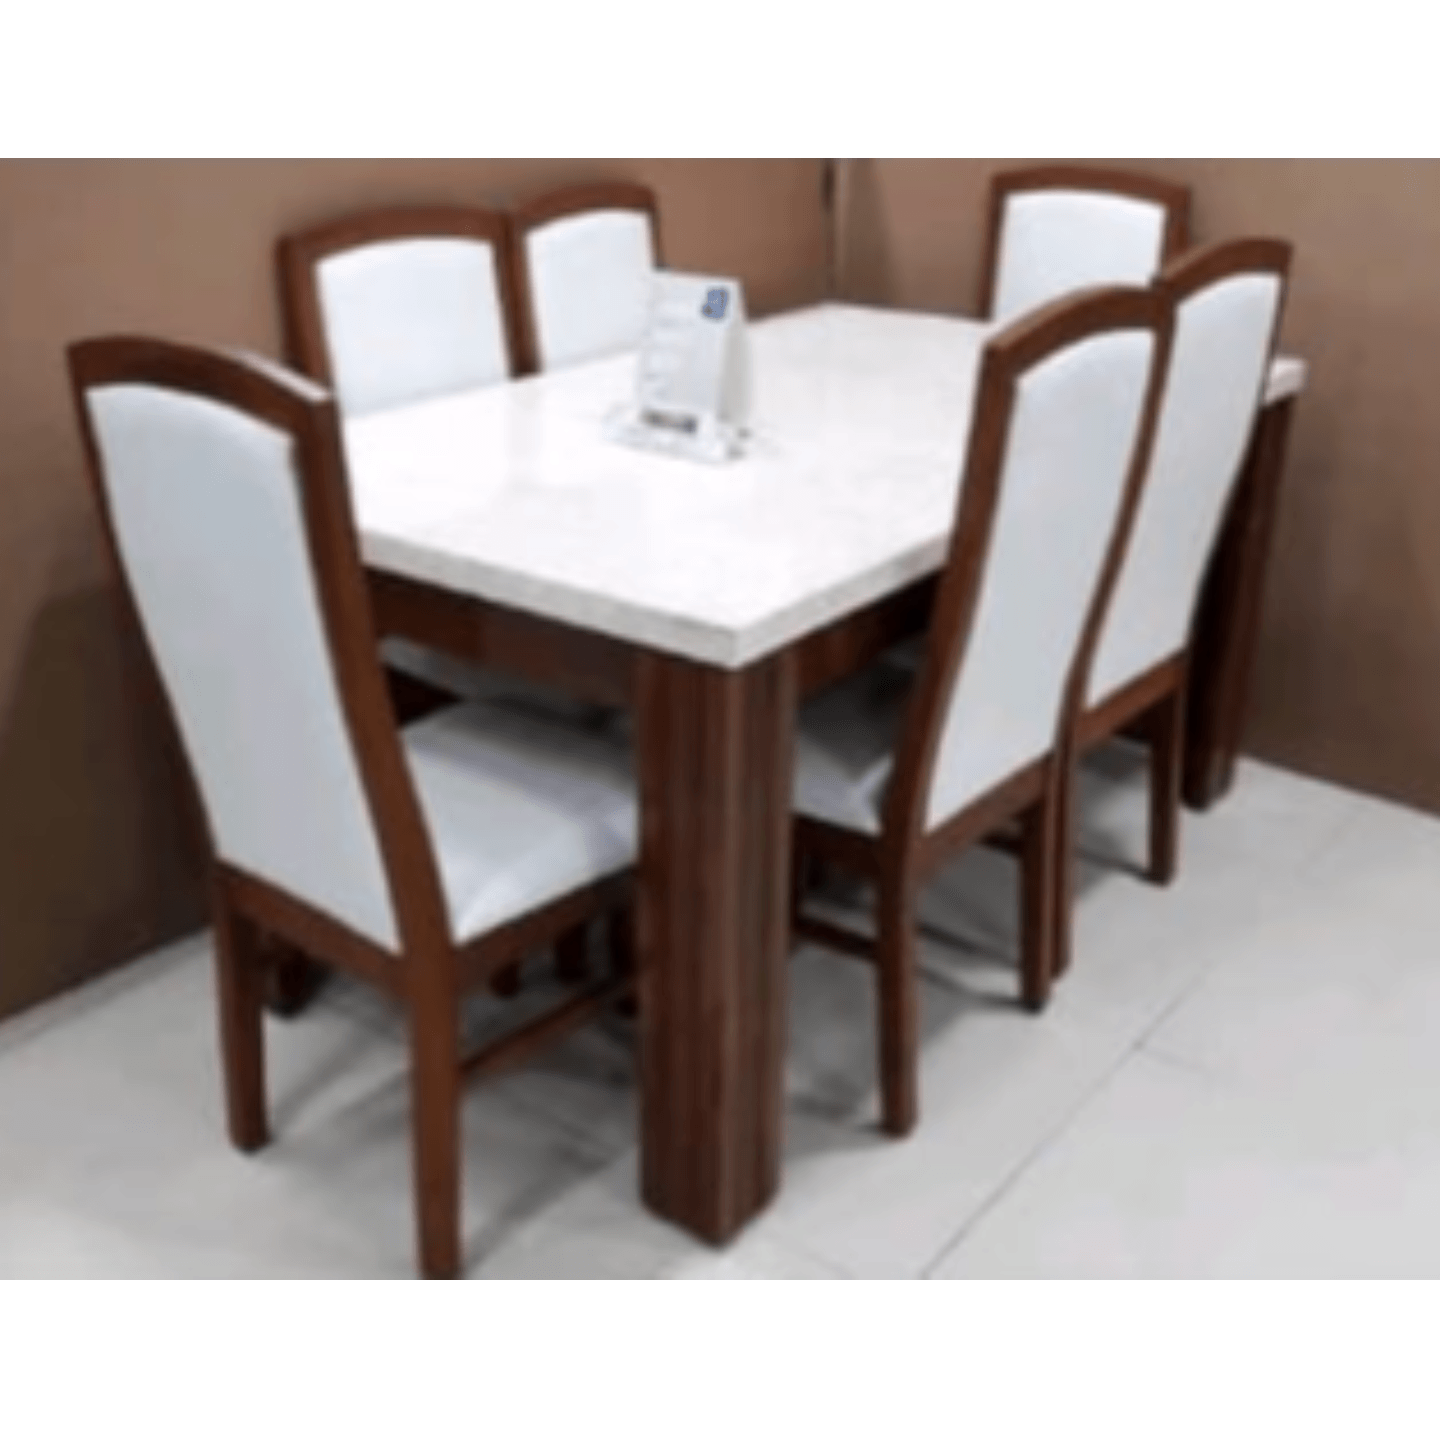 DW Marble Top H-009 Six Seater Dining Table Set in Brown Colour